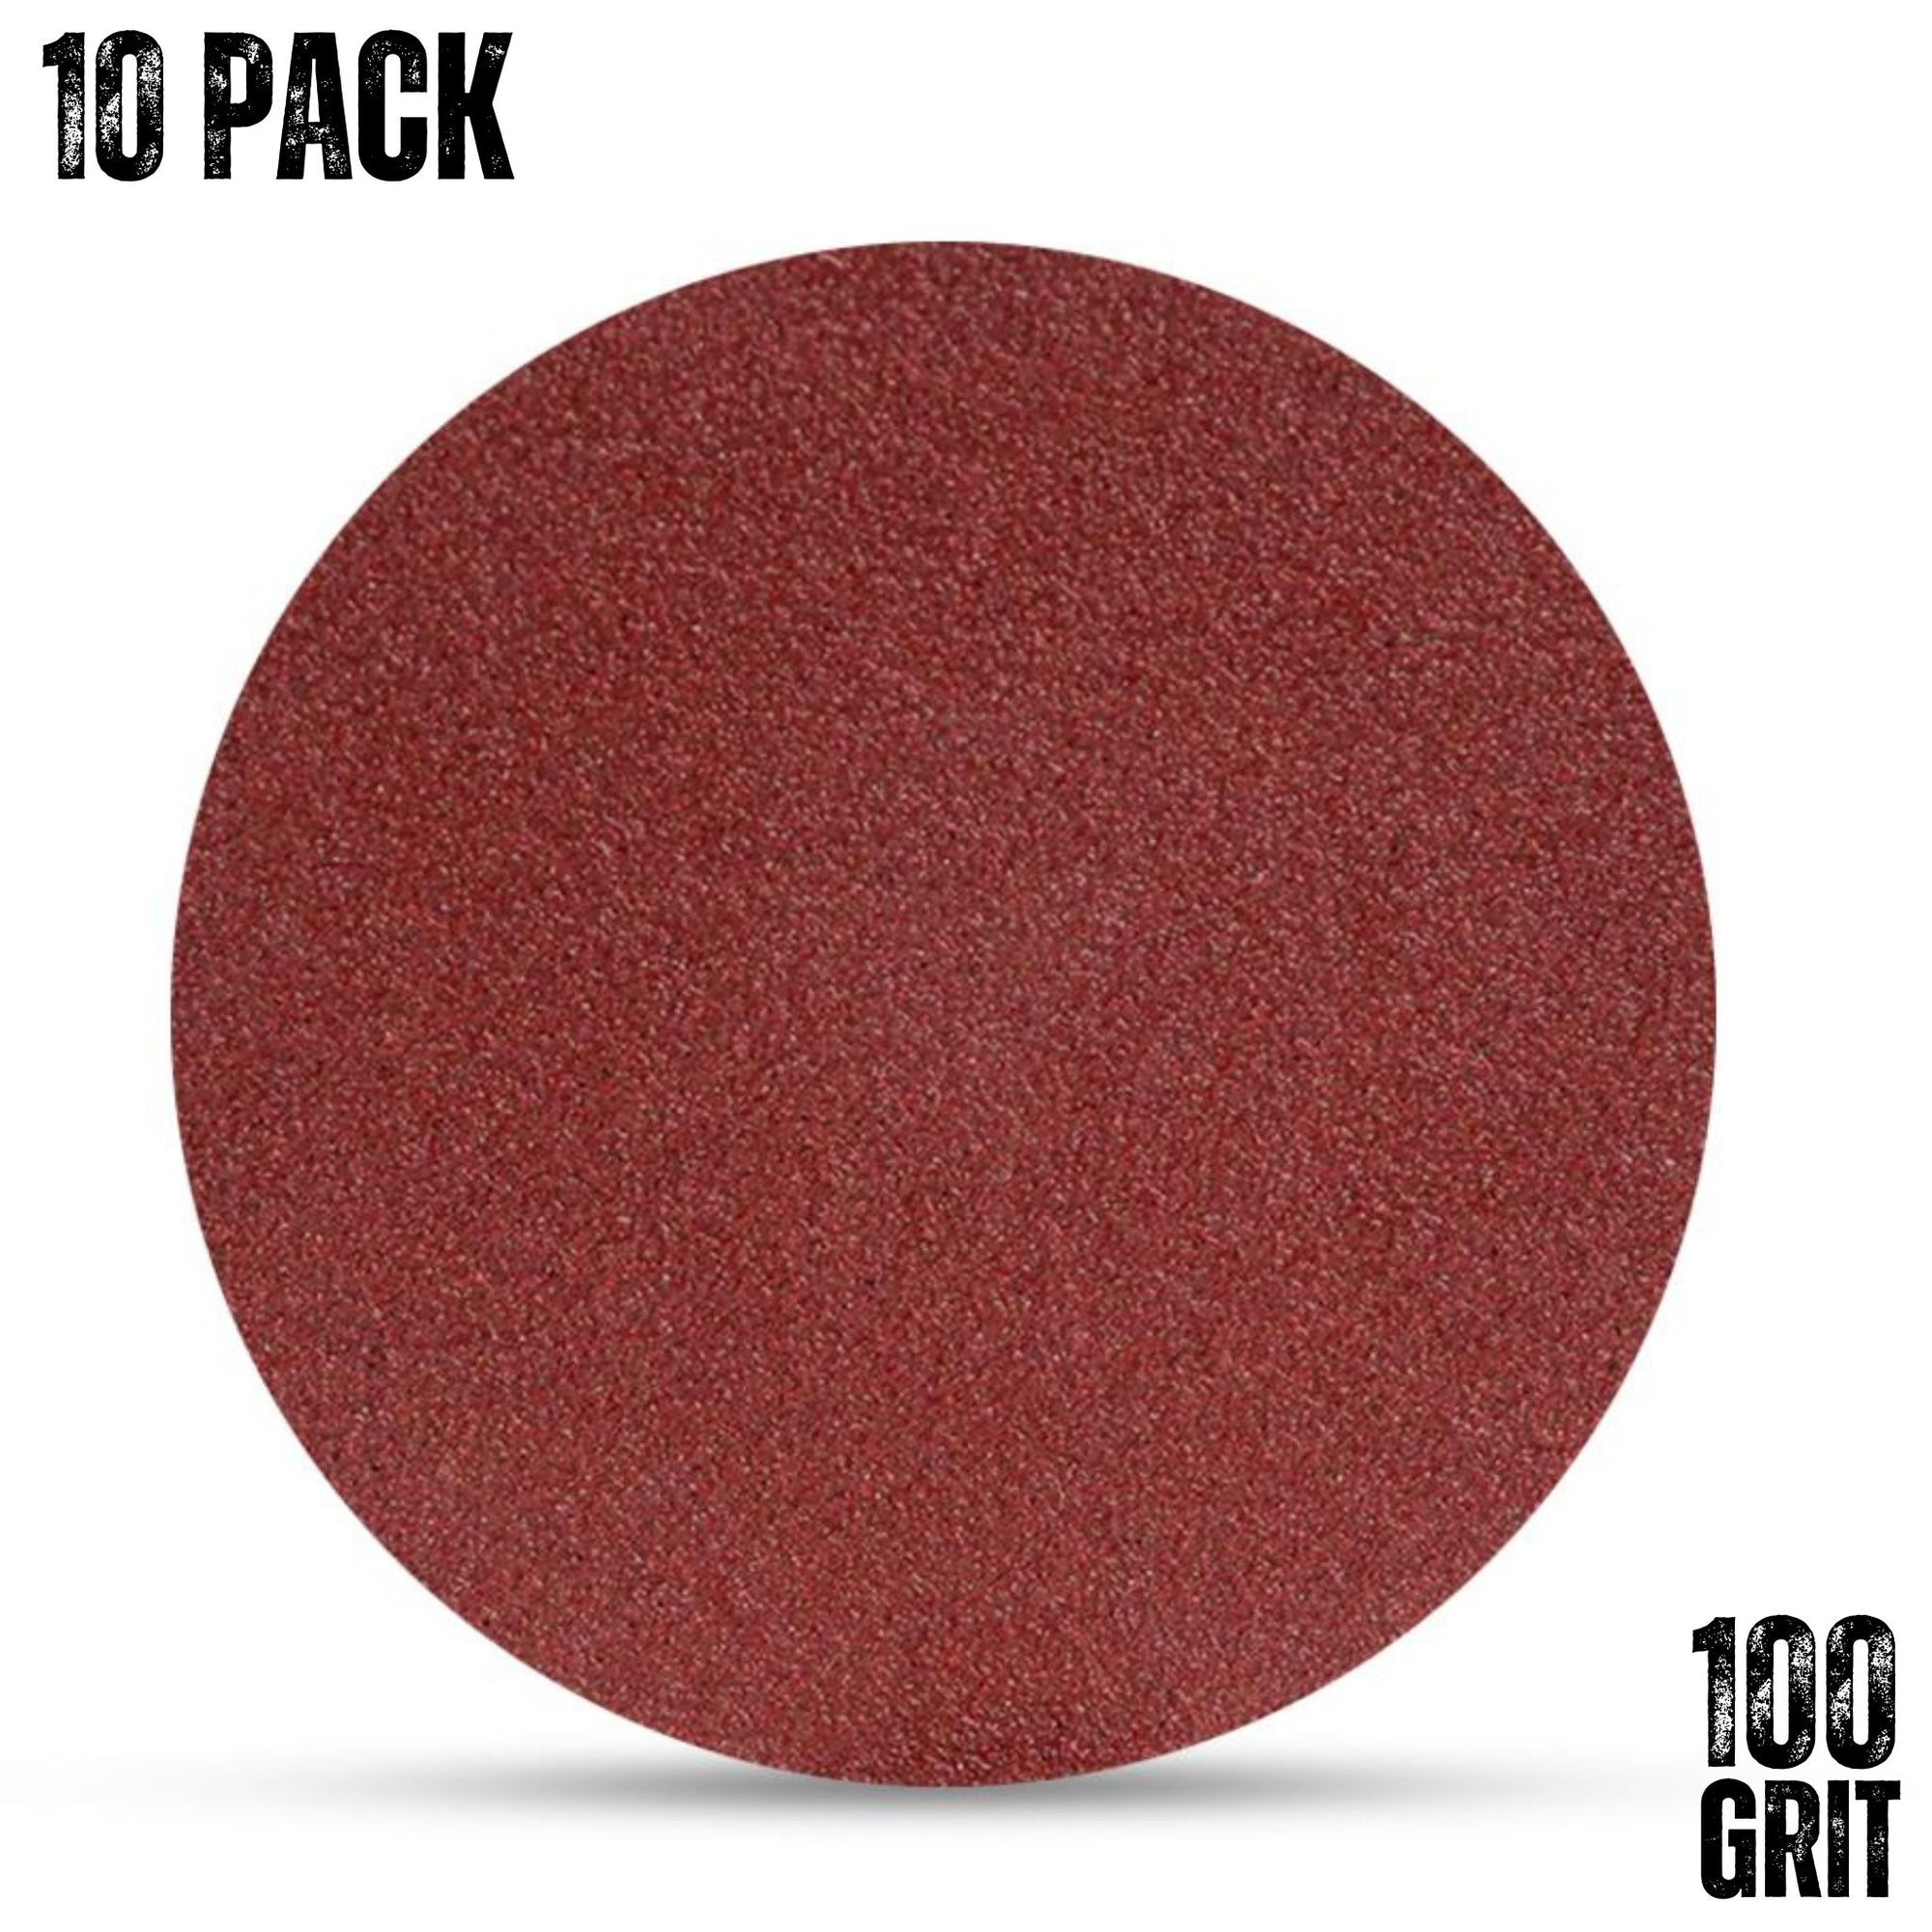 300mm 12" Round Orbital Sanding Disc Hook Look Paper | 10 PACK - South East Clearance Centre